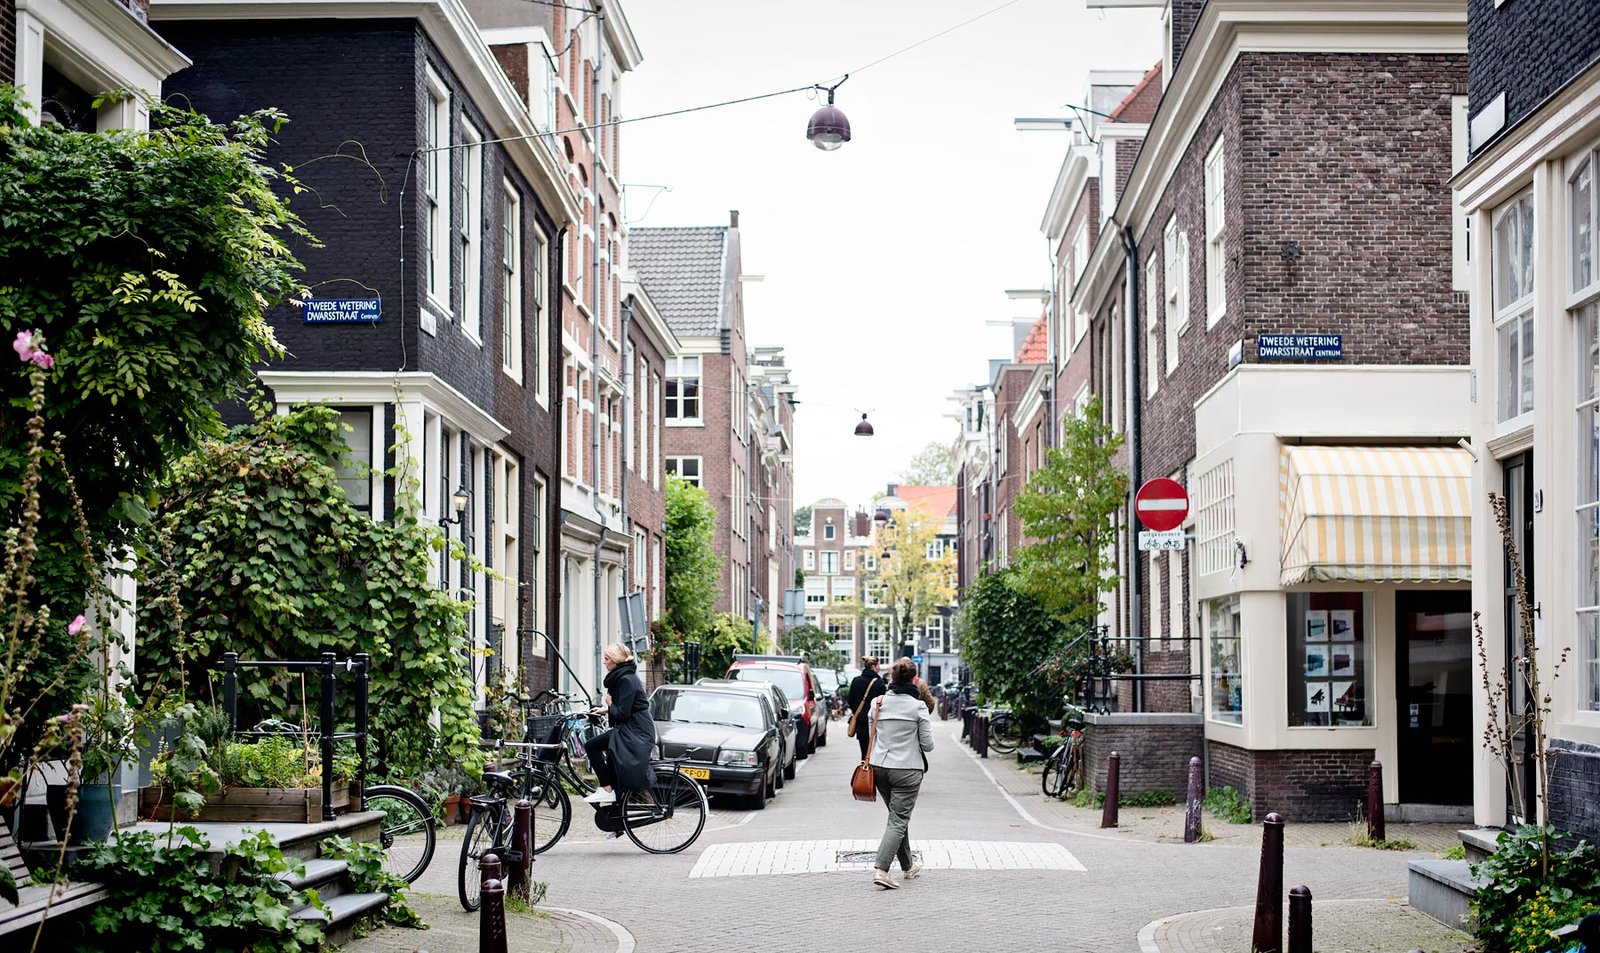 My 5 new favorite places in Amsterdam 